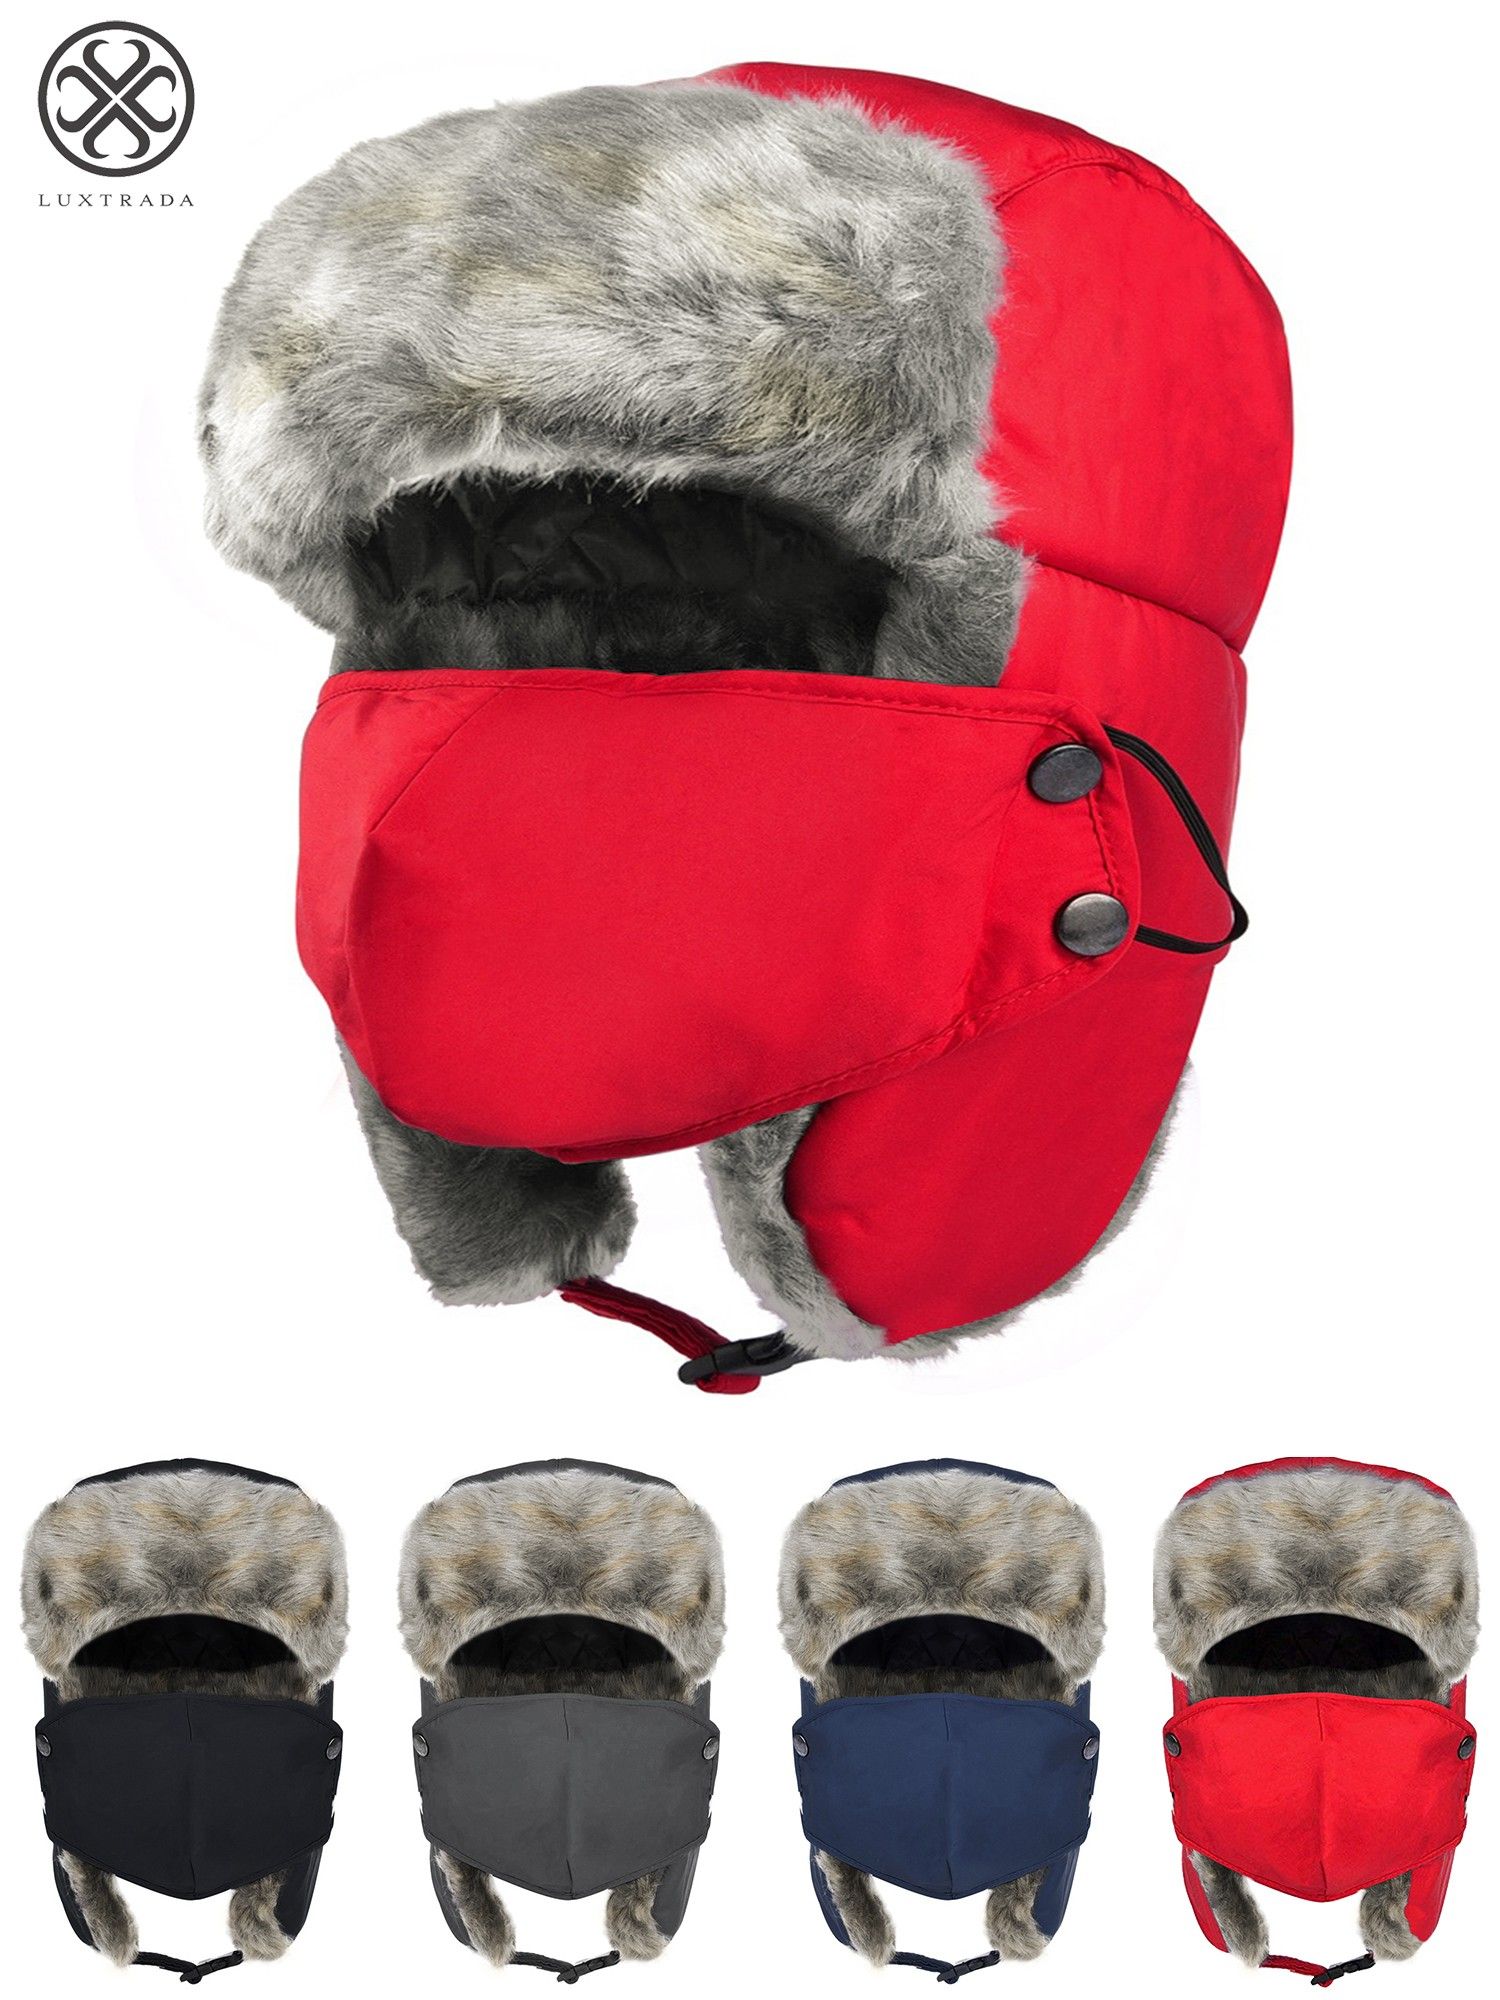 Luxtrada Winter Hats for Men and Women Trooper Hunting Hat Ushanka Hat Ski Hat with Ear Flaps Windproof Waterproof Warm Hat (Red) - image 1 of 10